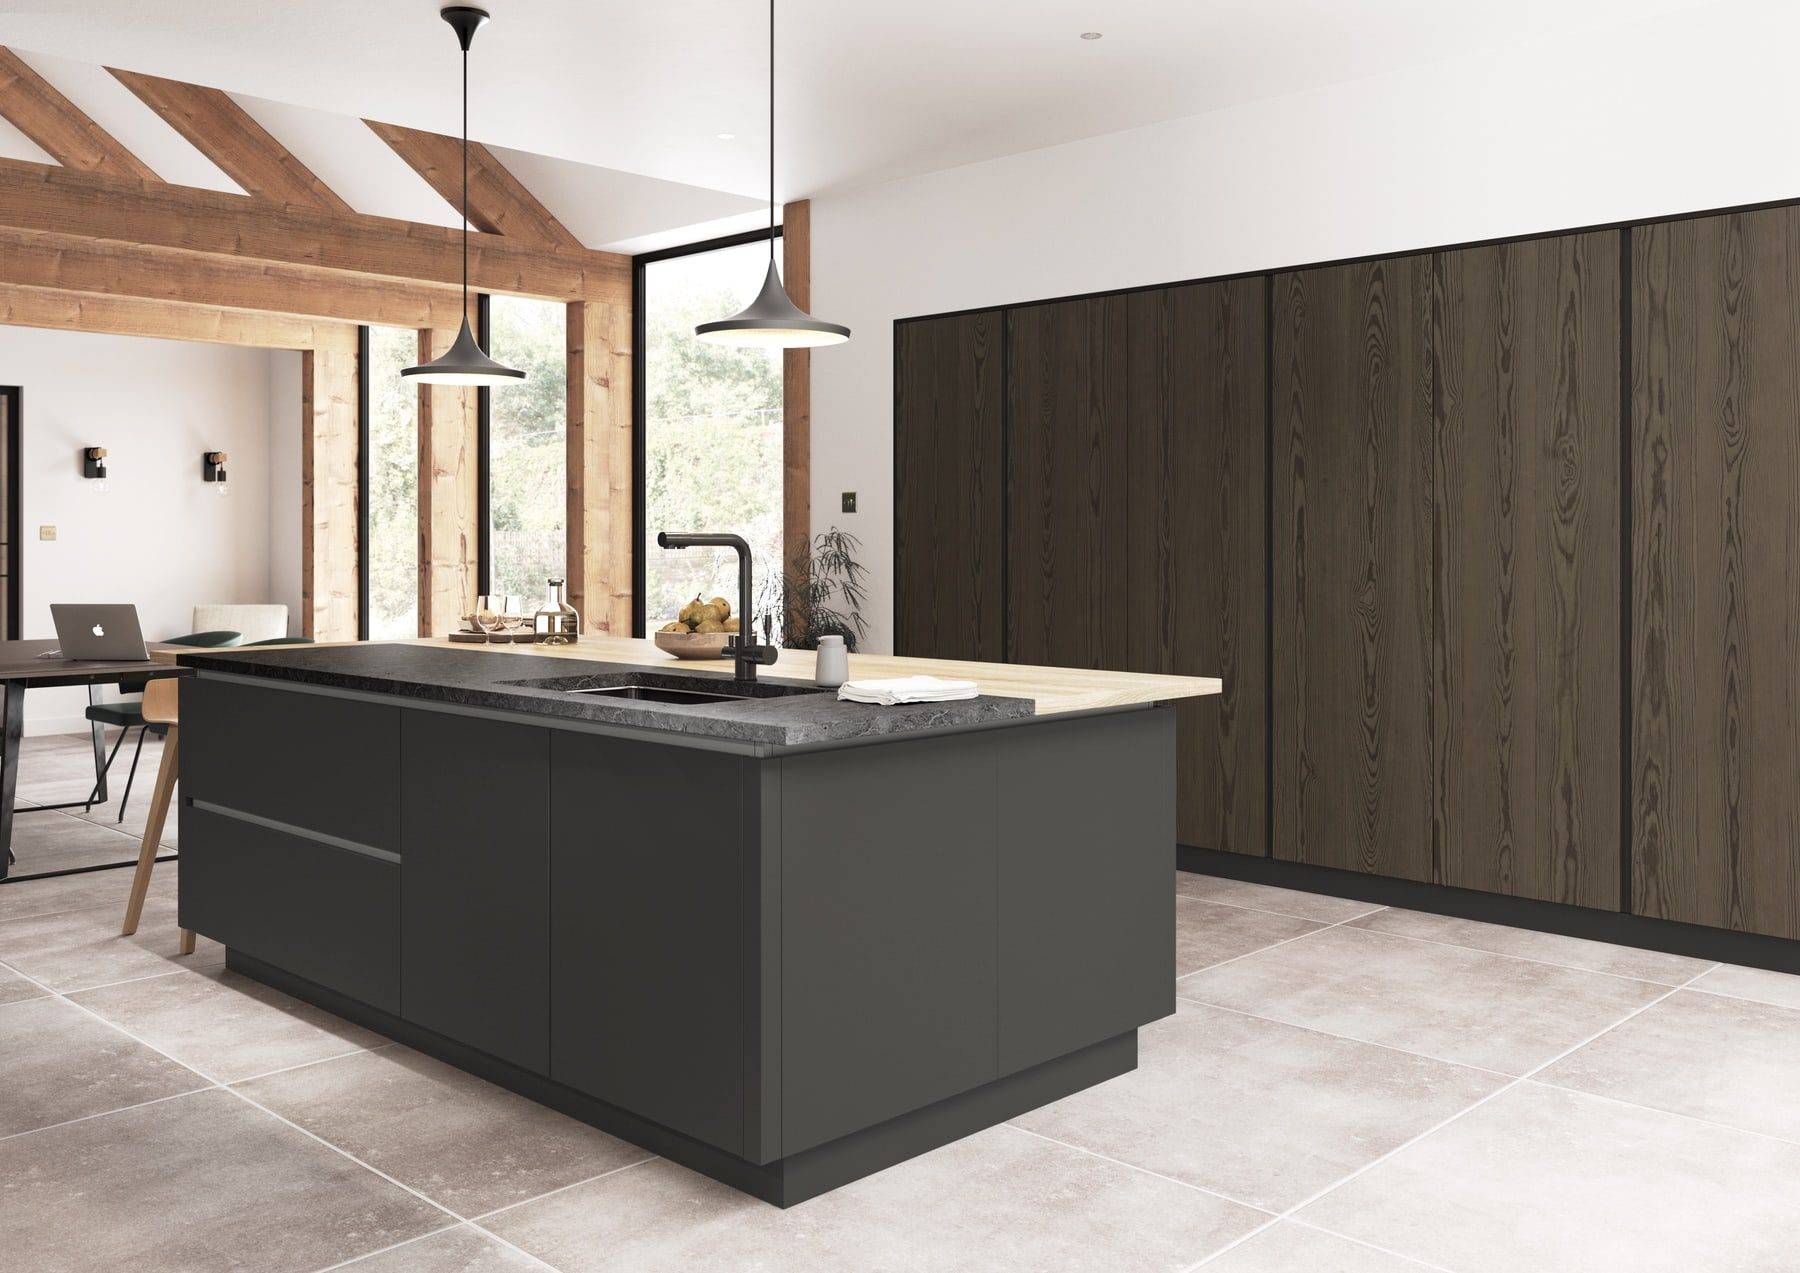 Kelso Truffle Grey And Zola Matte Graphite Handleless Kitchen With Island | Colourhill, Lincoln